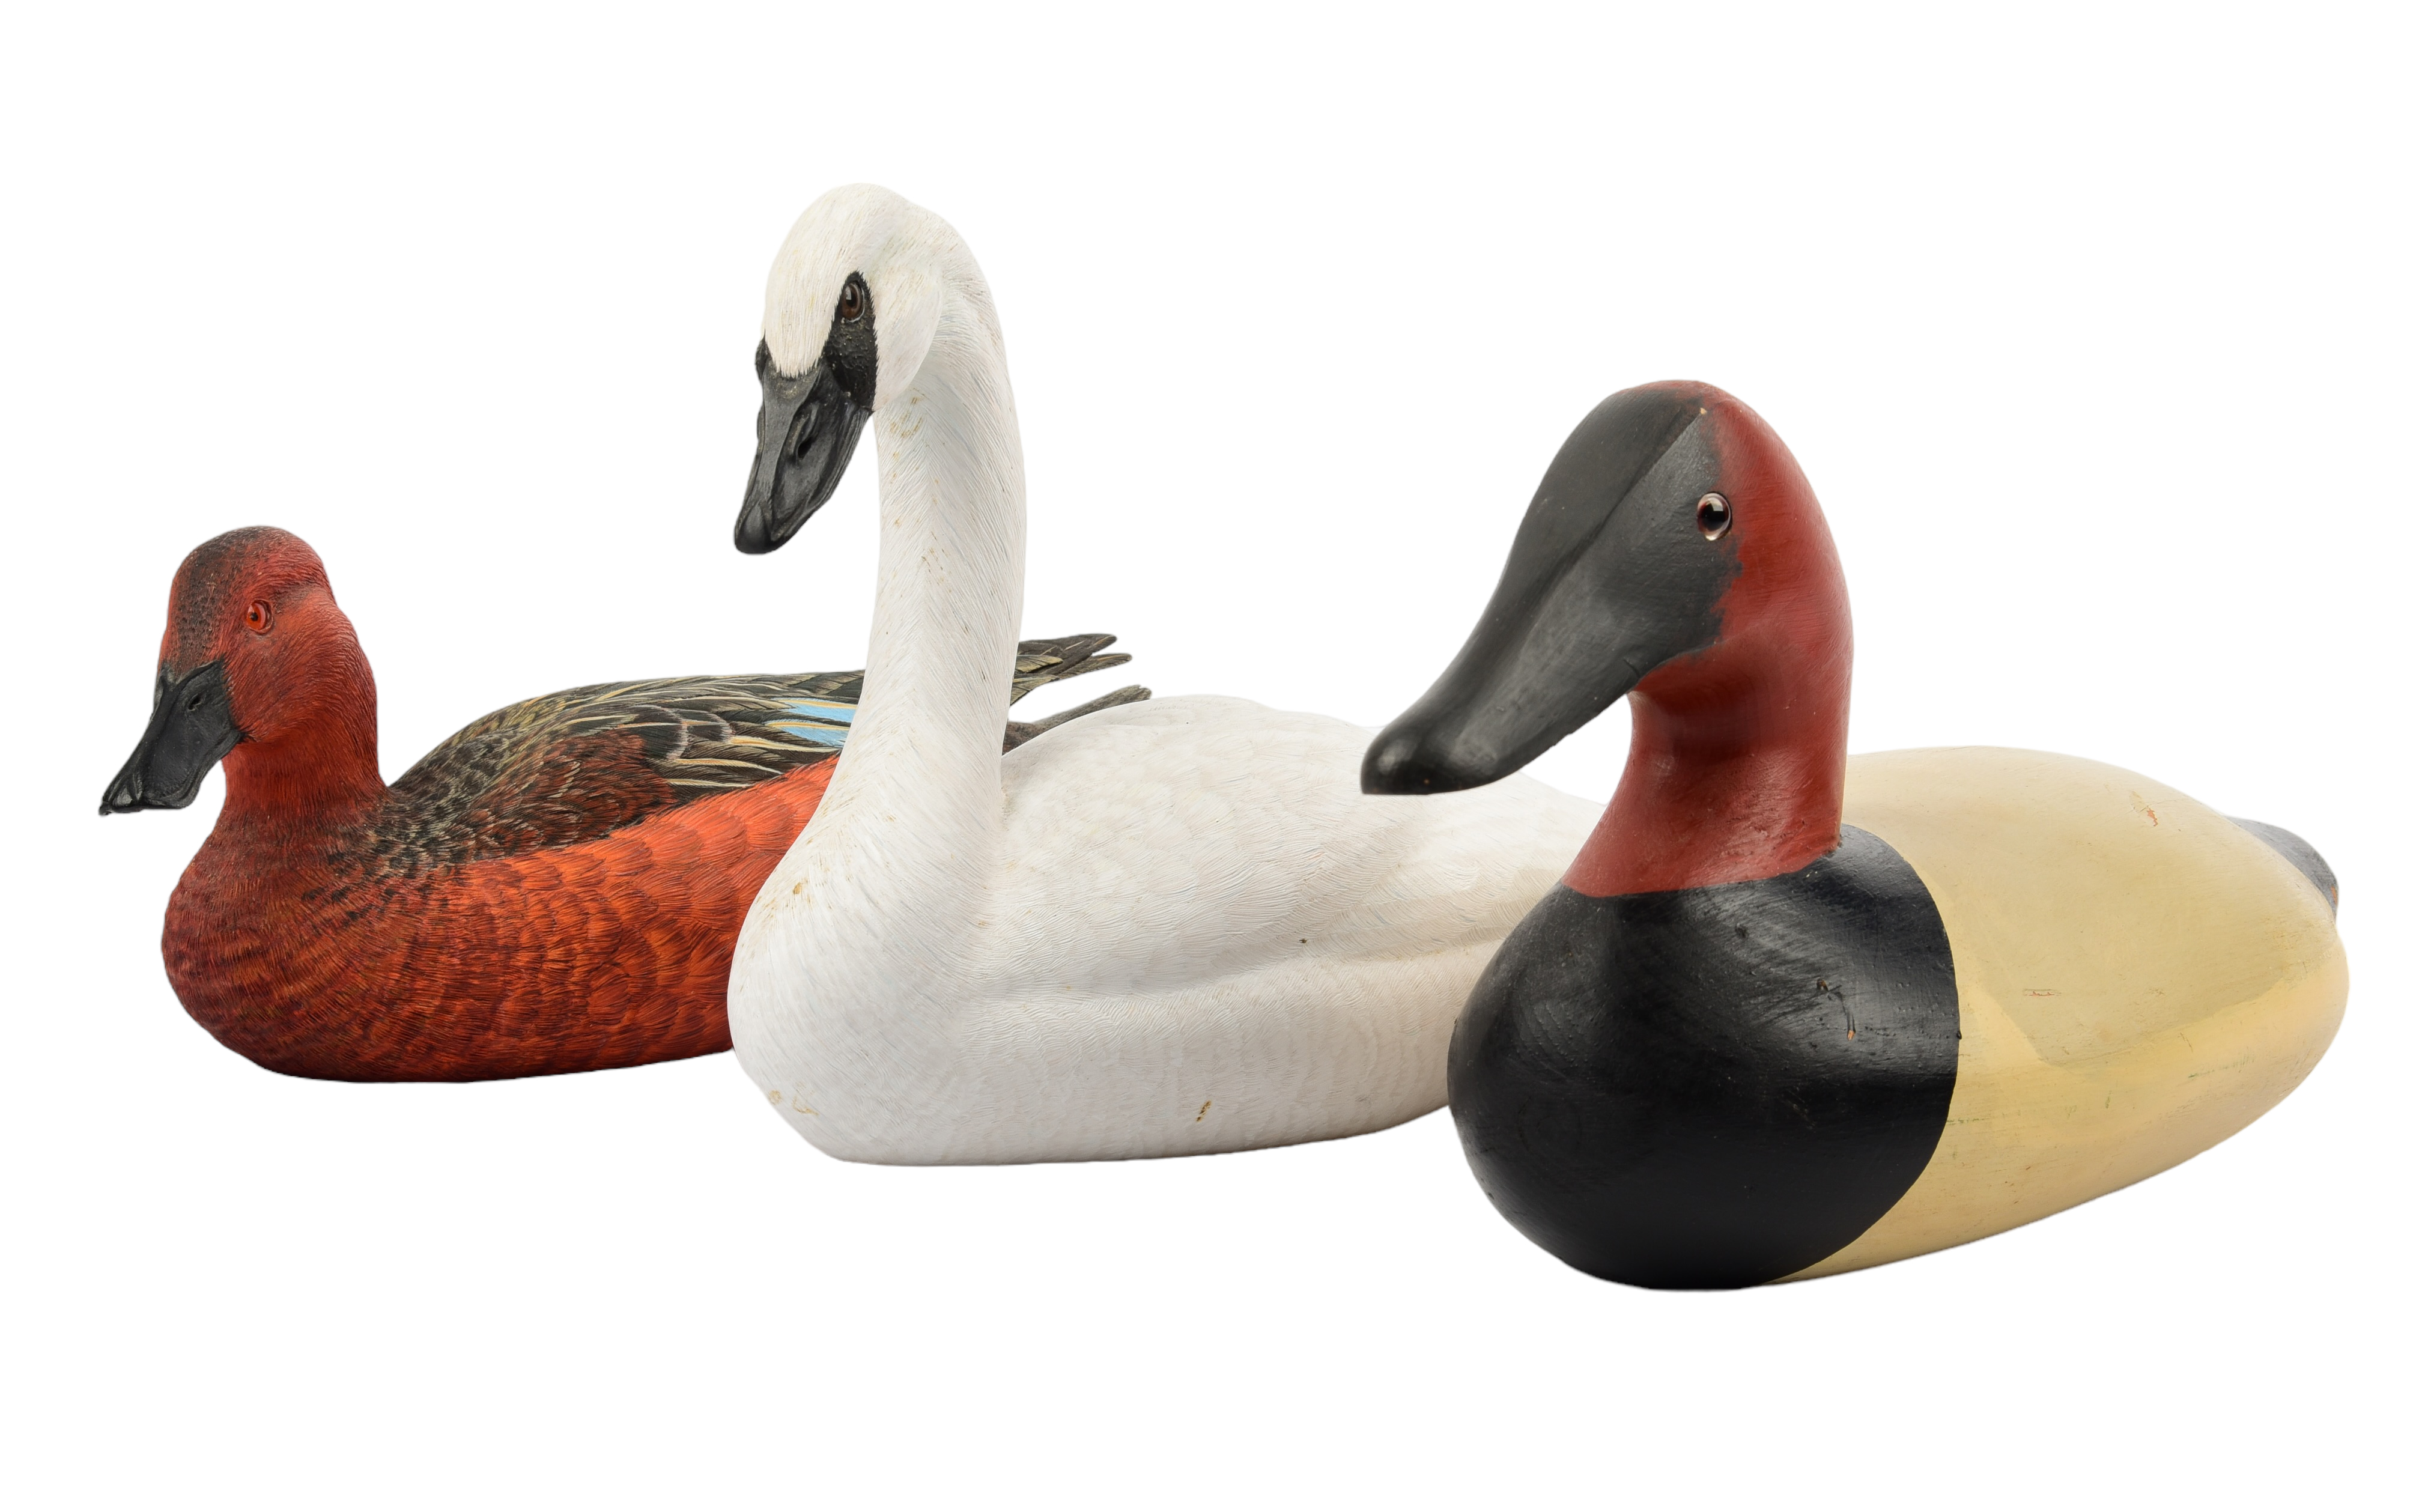  3 Carved painted wood decoys  3b1032